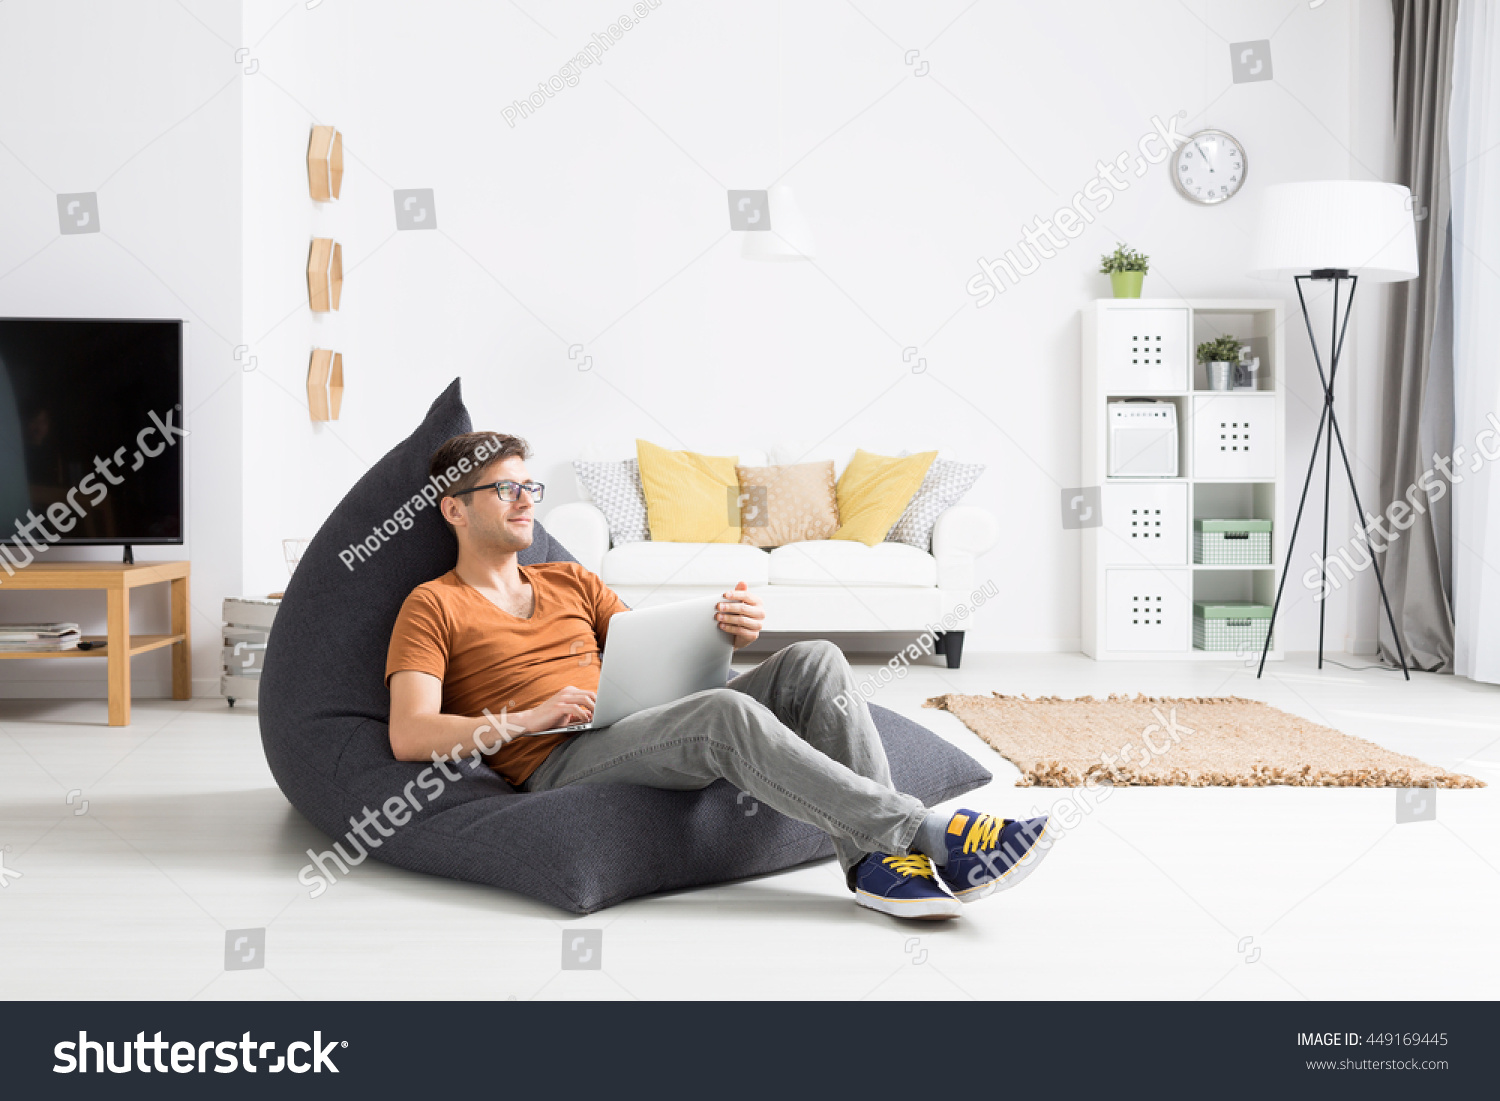 Young man relaxing comfortably in a grey sitting sack in a bright studio flat #449169445